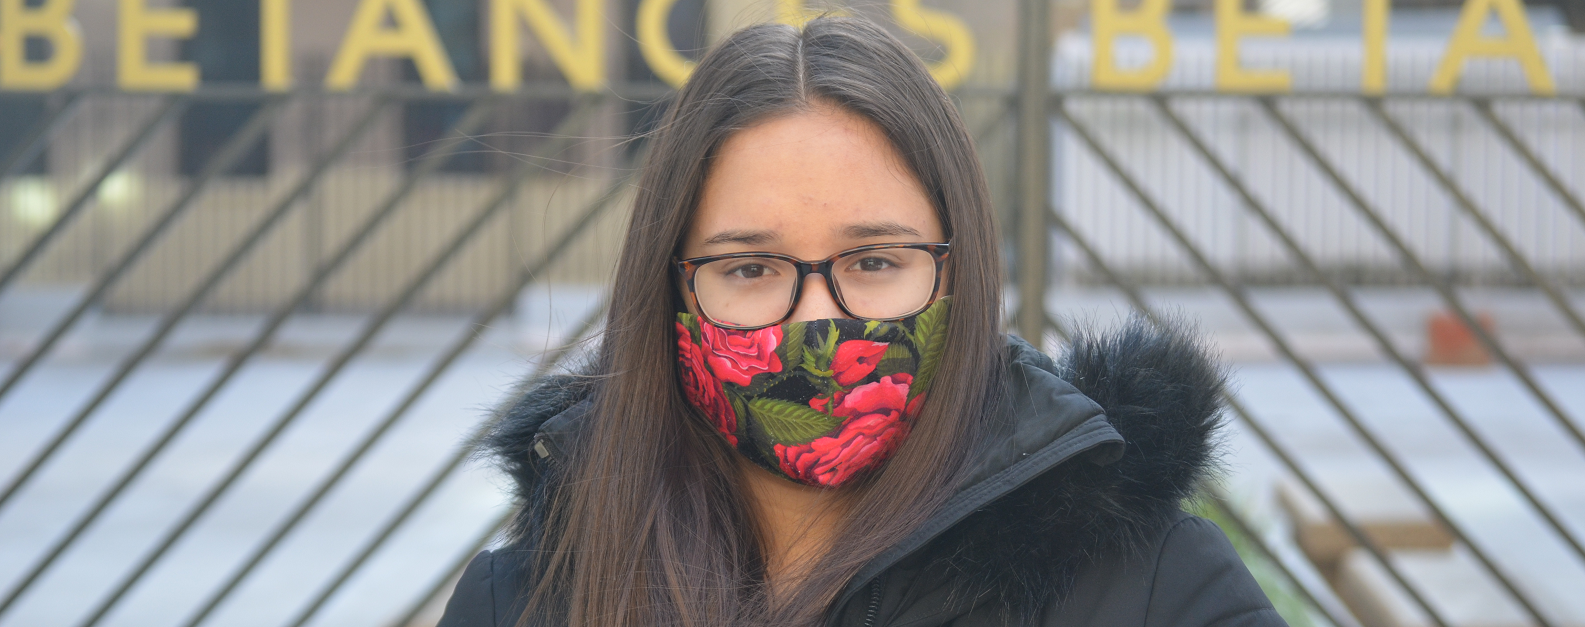 A girl with glasses and a flower mask looking at the camera